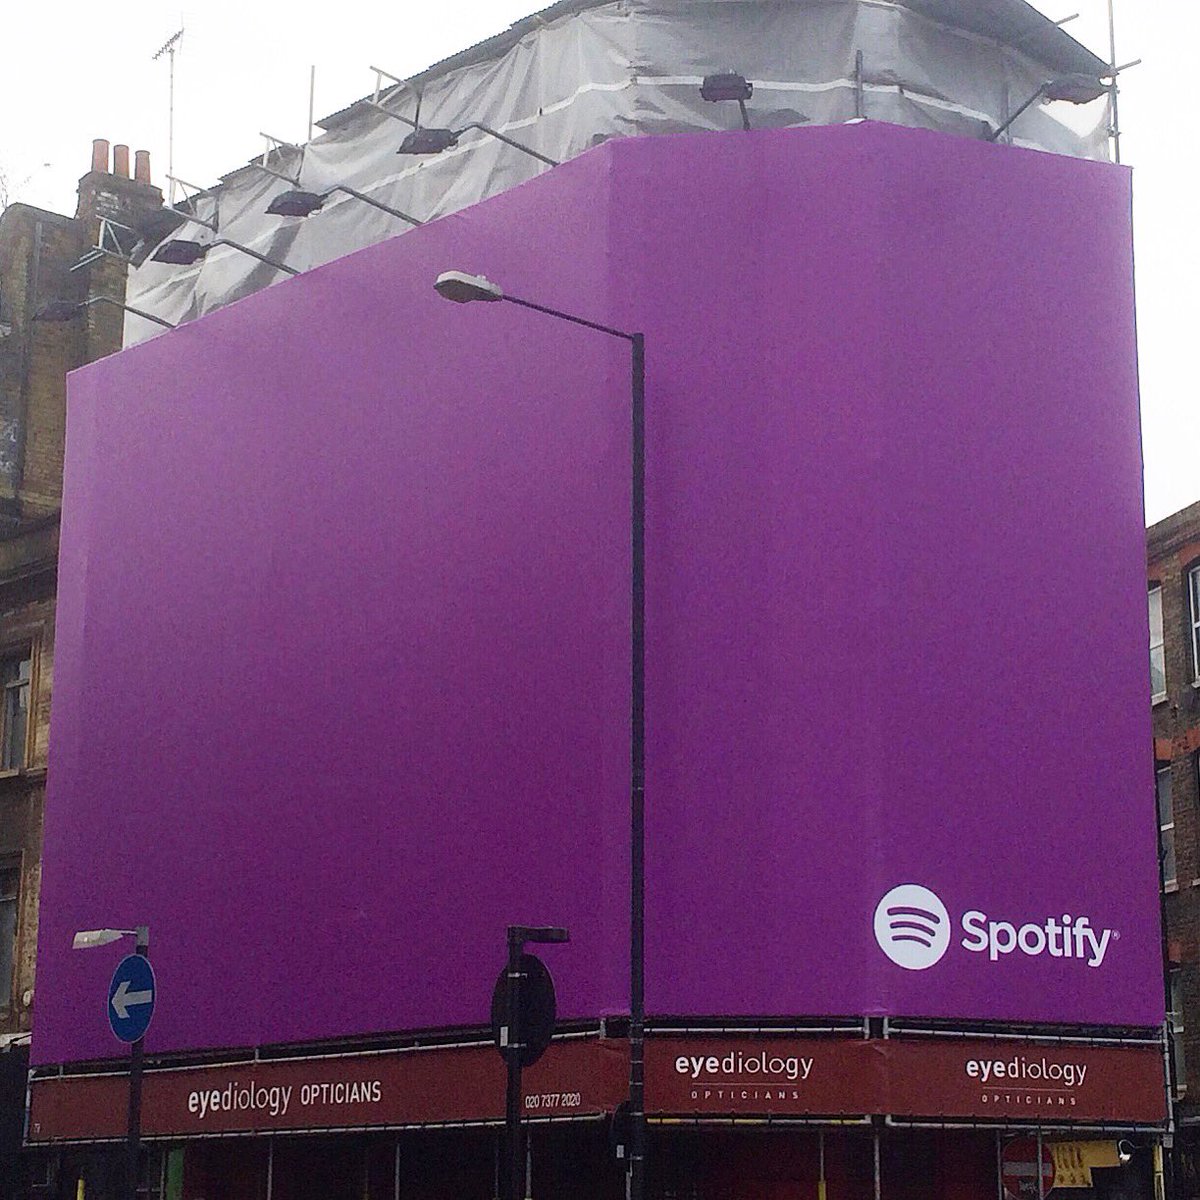 New purple Spotify ads suggest that Prince is coming to Spotify